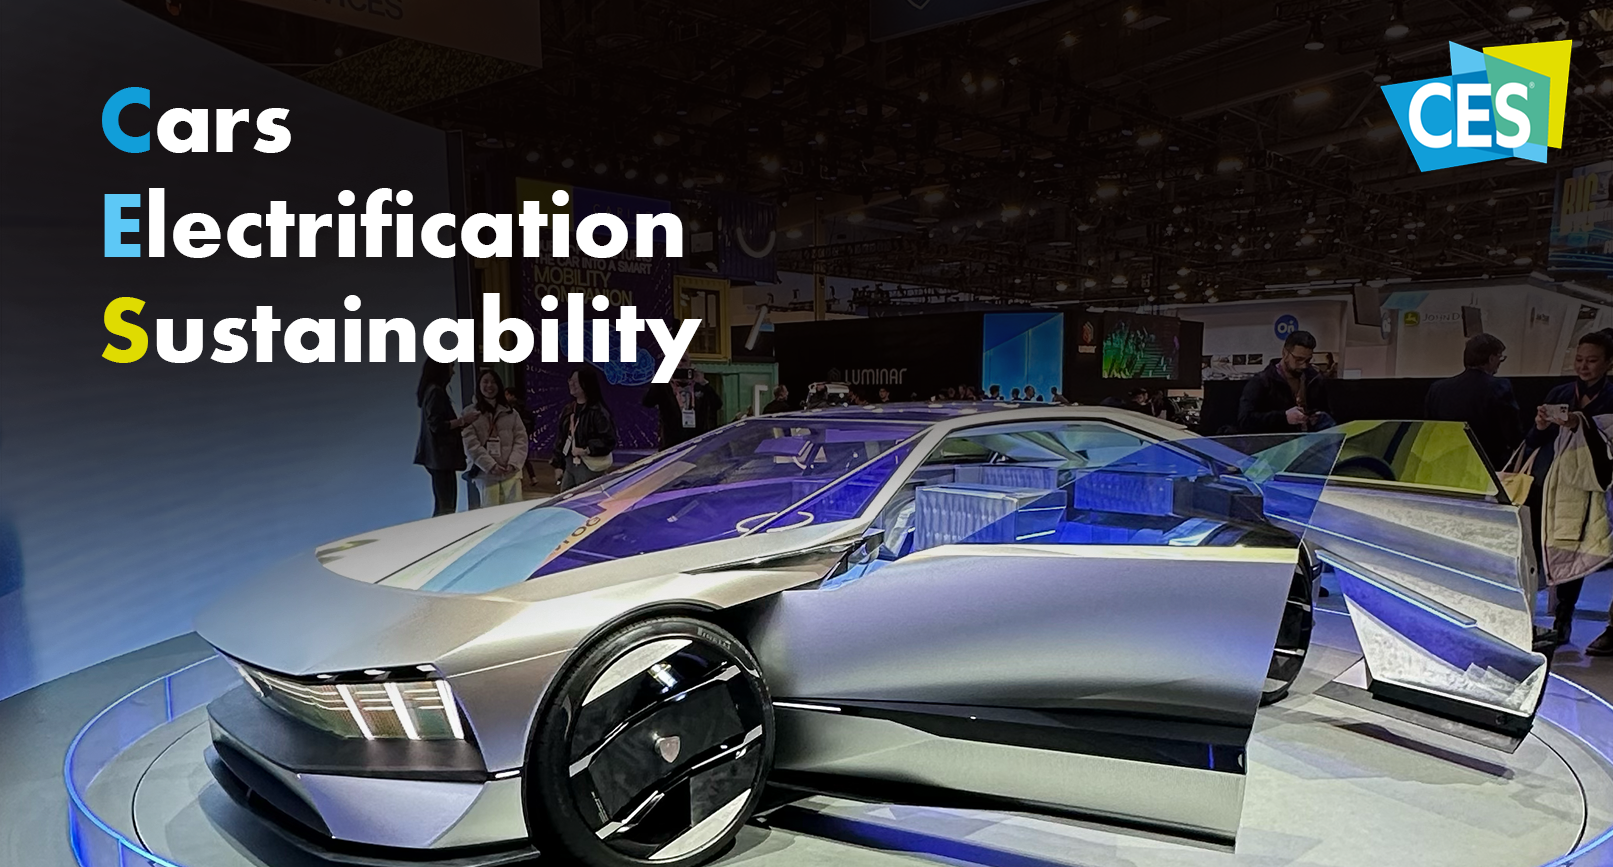 CES 2023 All about Cars, Electrification and Sustainability